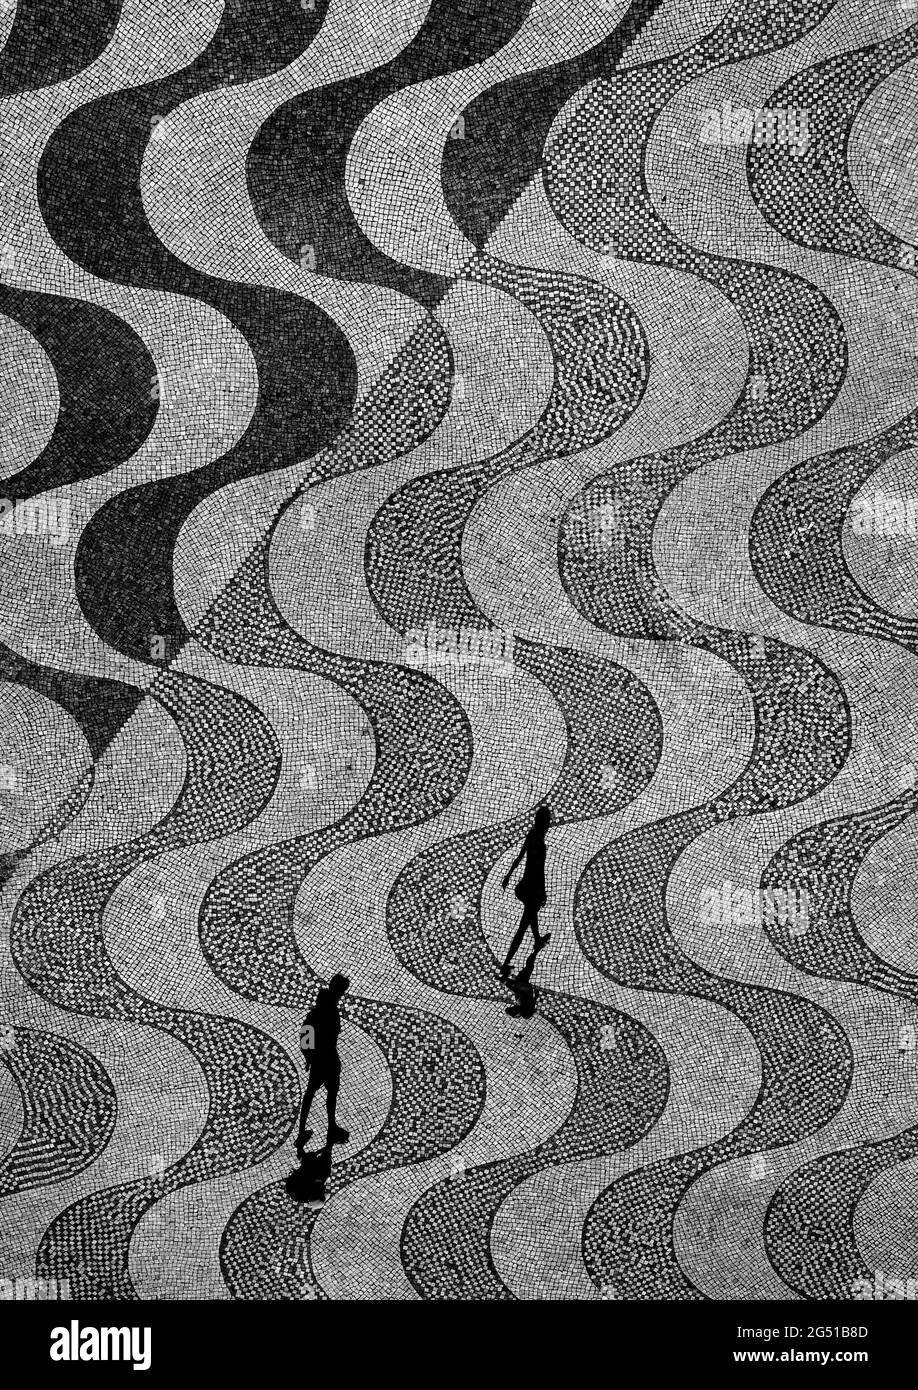 A man walks behind a woman in Belém, a district in Lisbon, Portugal, under the discoveries monument, by the Tagus river. Stock Photo